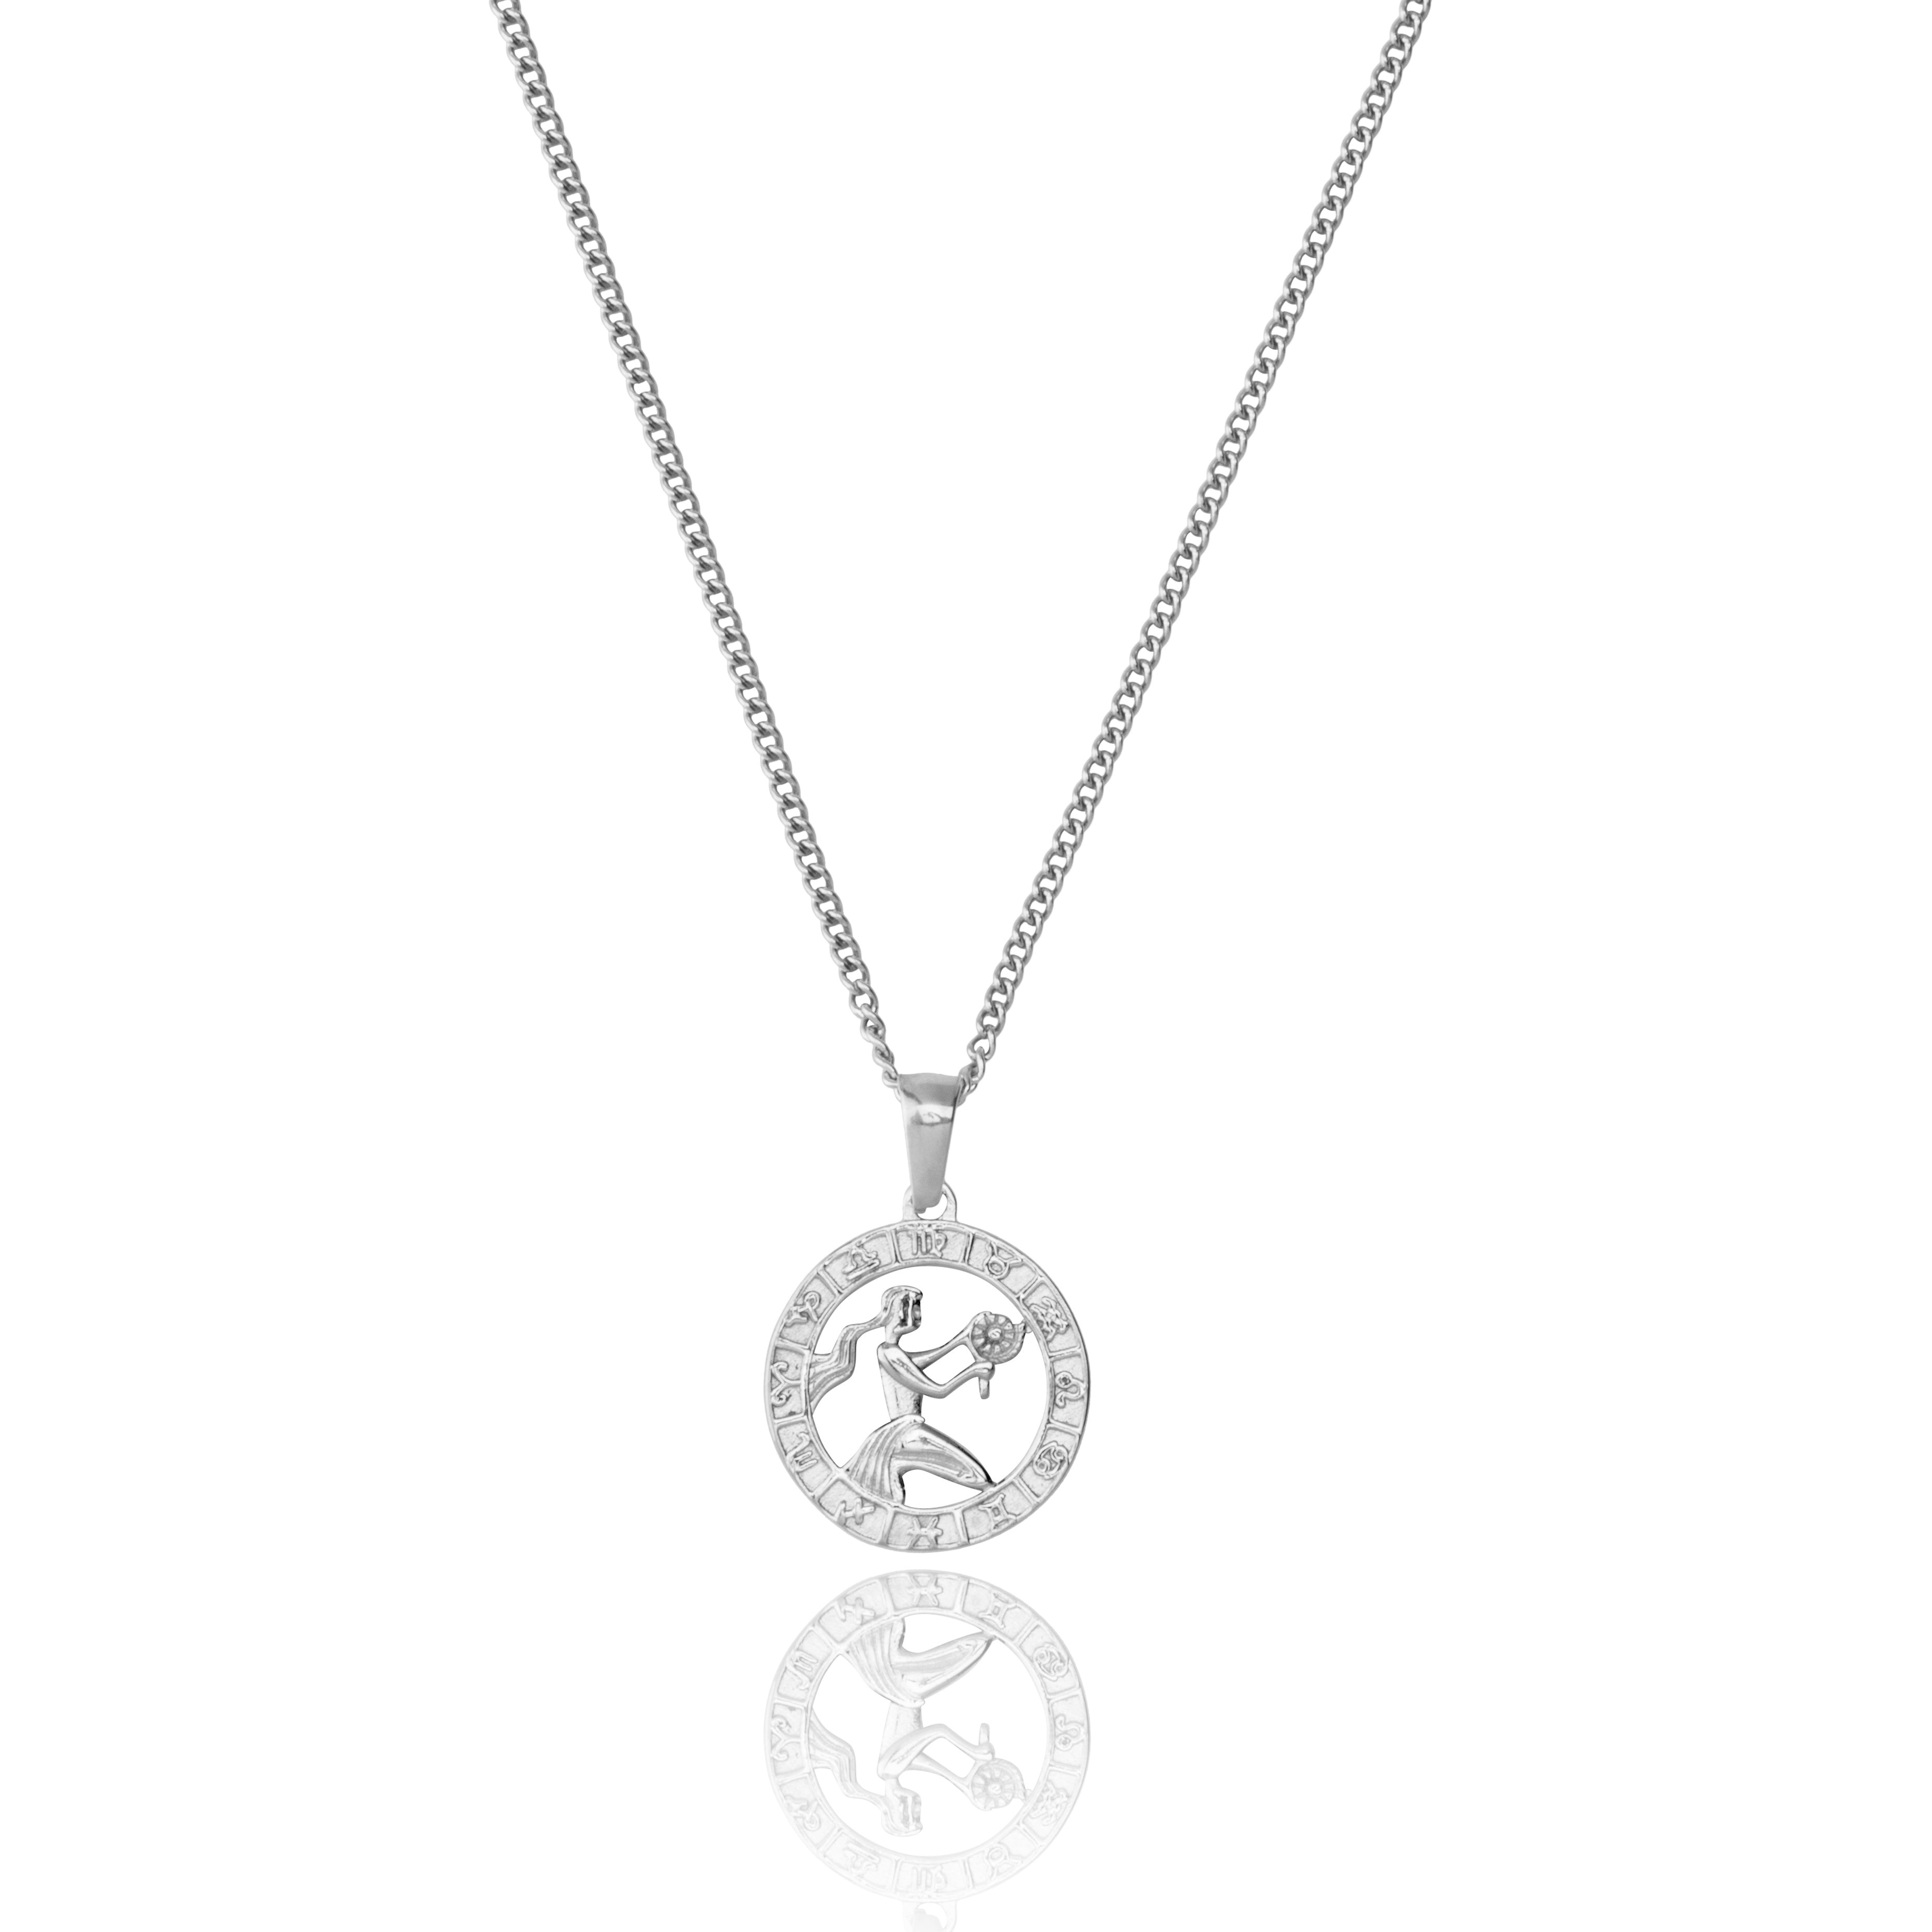 Stainless Steel Virgo Zodiac Pendant and Chain